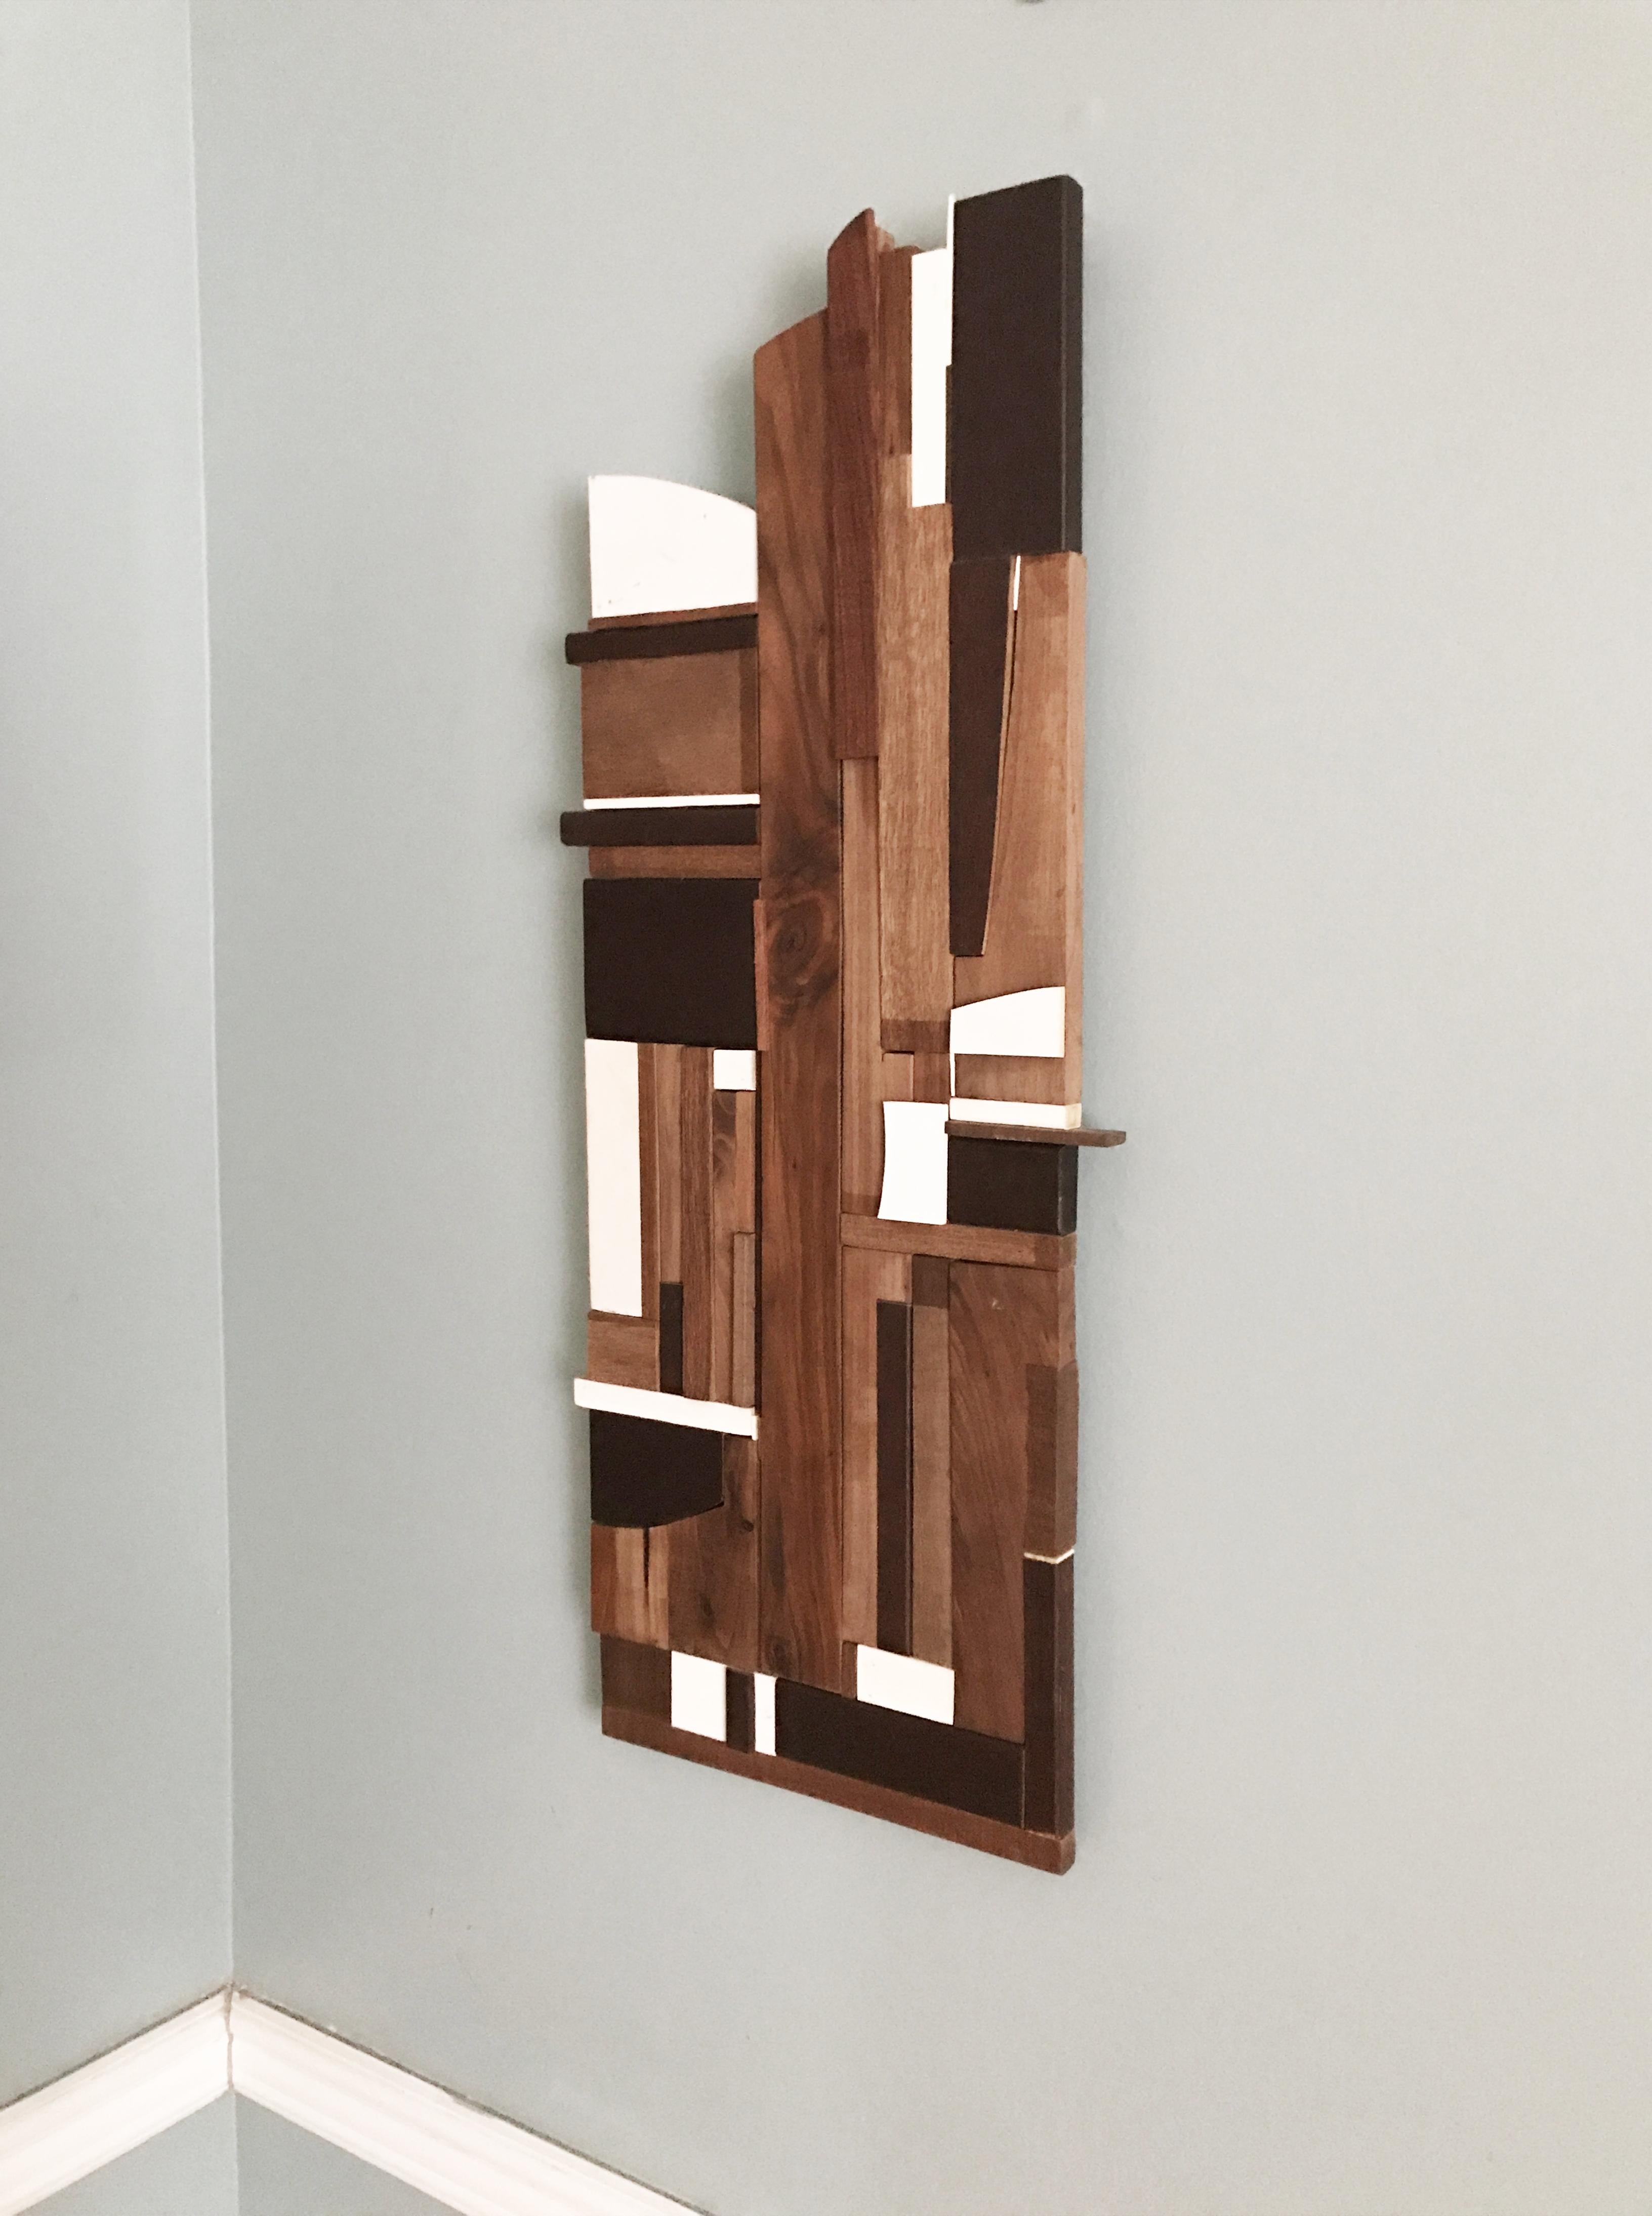 <p>Artist Comments<br />District 1 is a mixed media abstract wall sculpture made from a variety of repurposed woods including pine, cherry, mahogany and walnut.  The piece uses both finished wood and raw textured wood.  It features a simple vertical